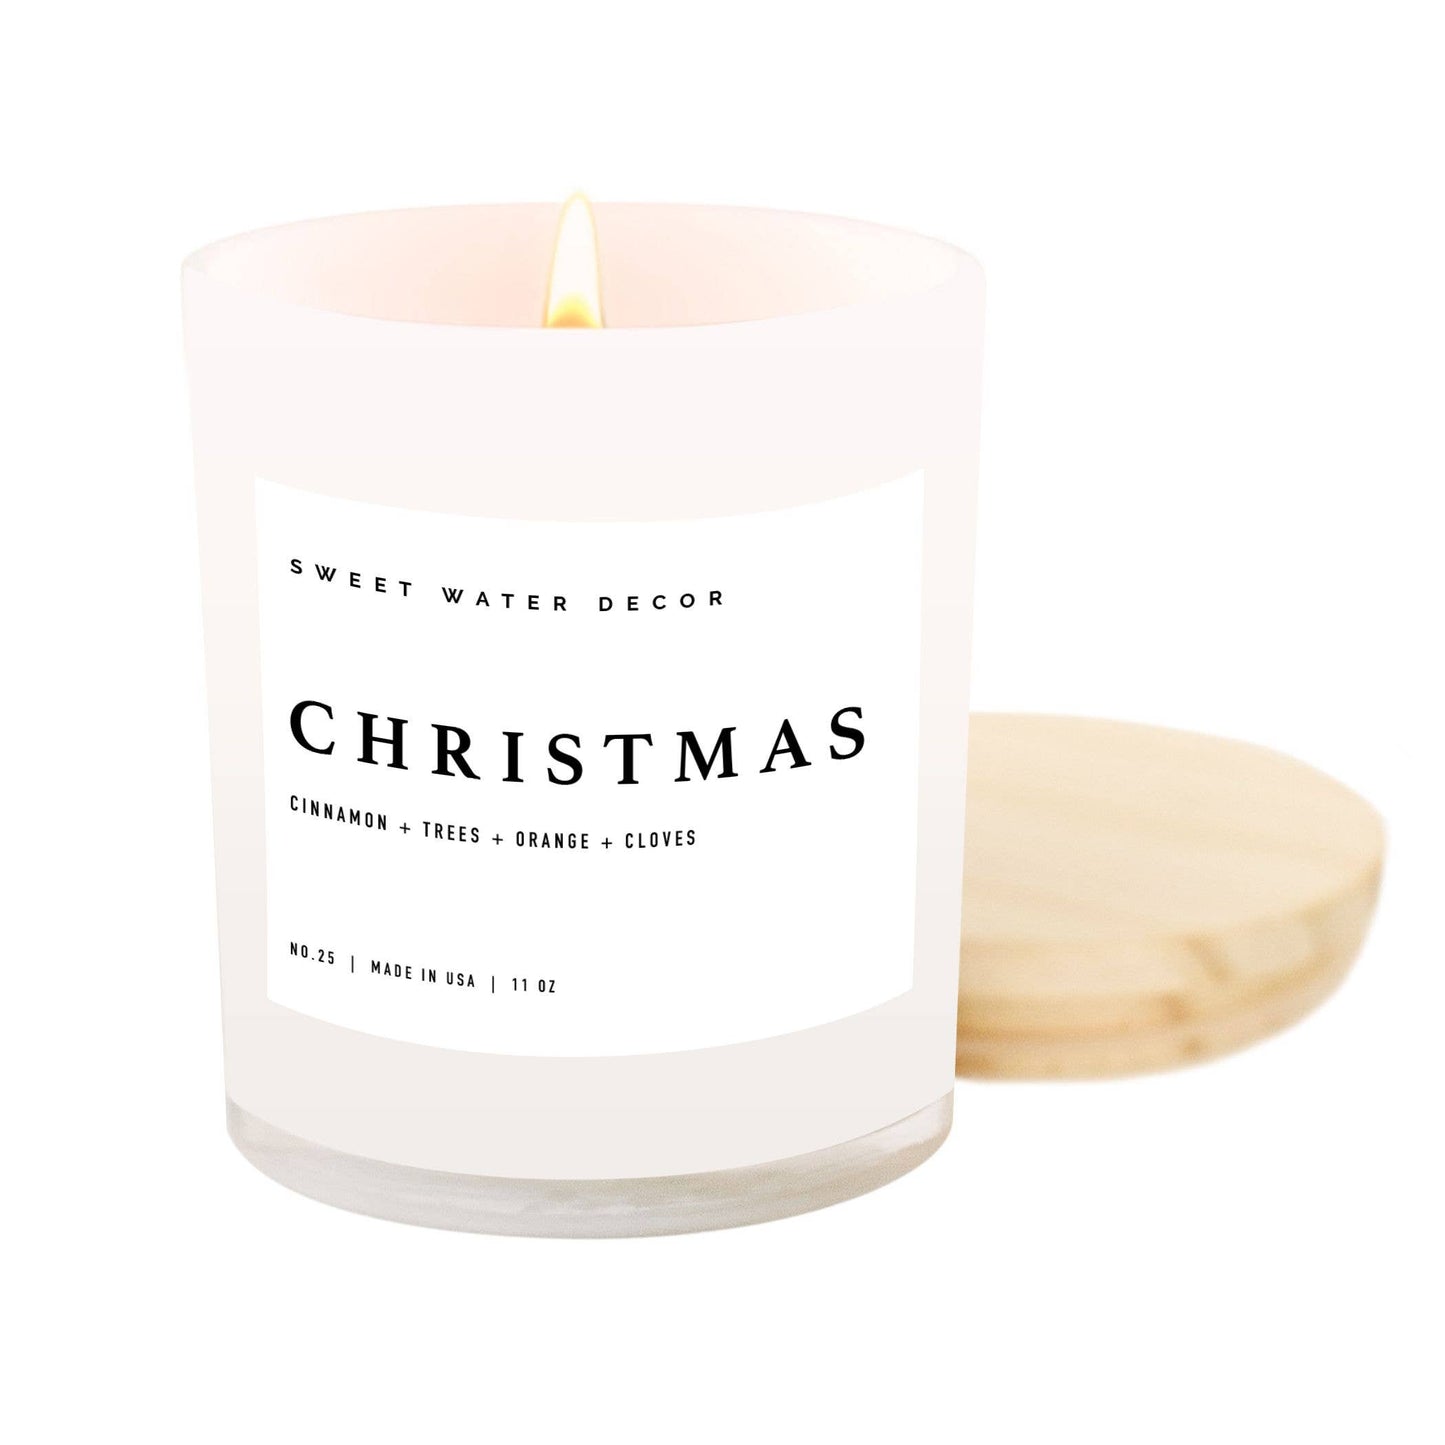 Sweet Water Decor - Christmas Soy Candle - White Jar - 11 oz